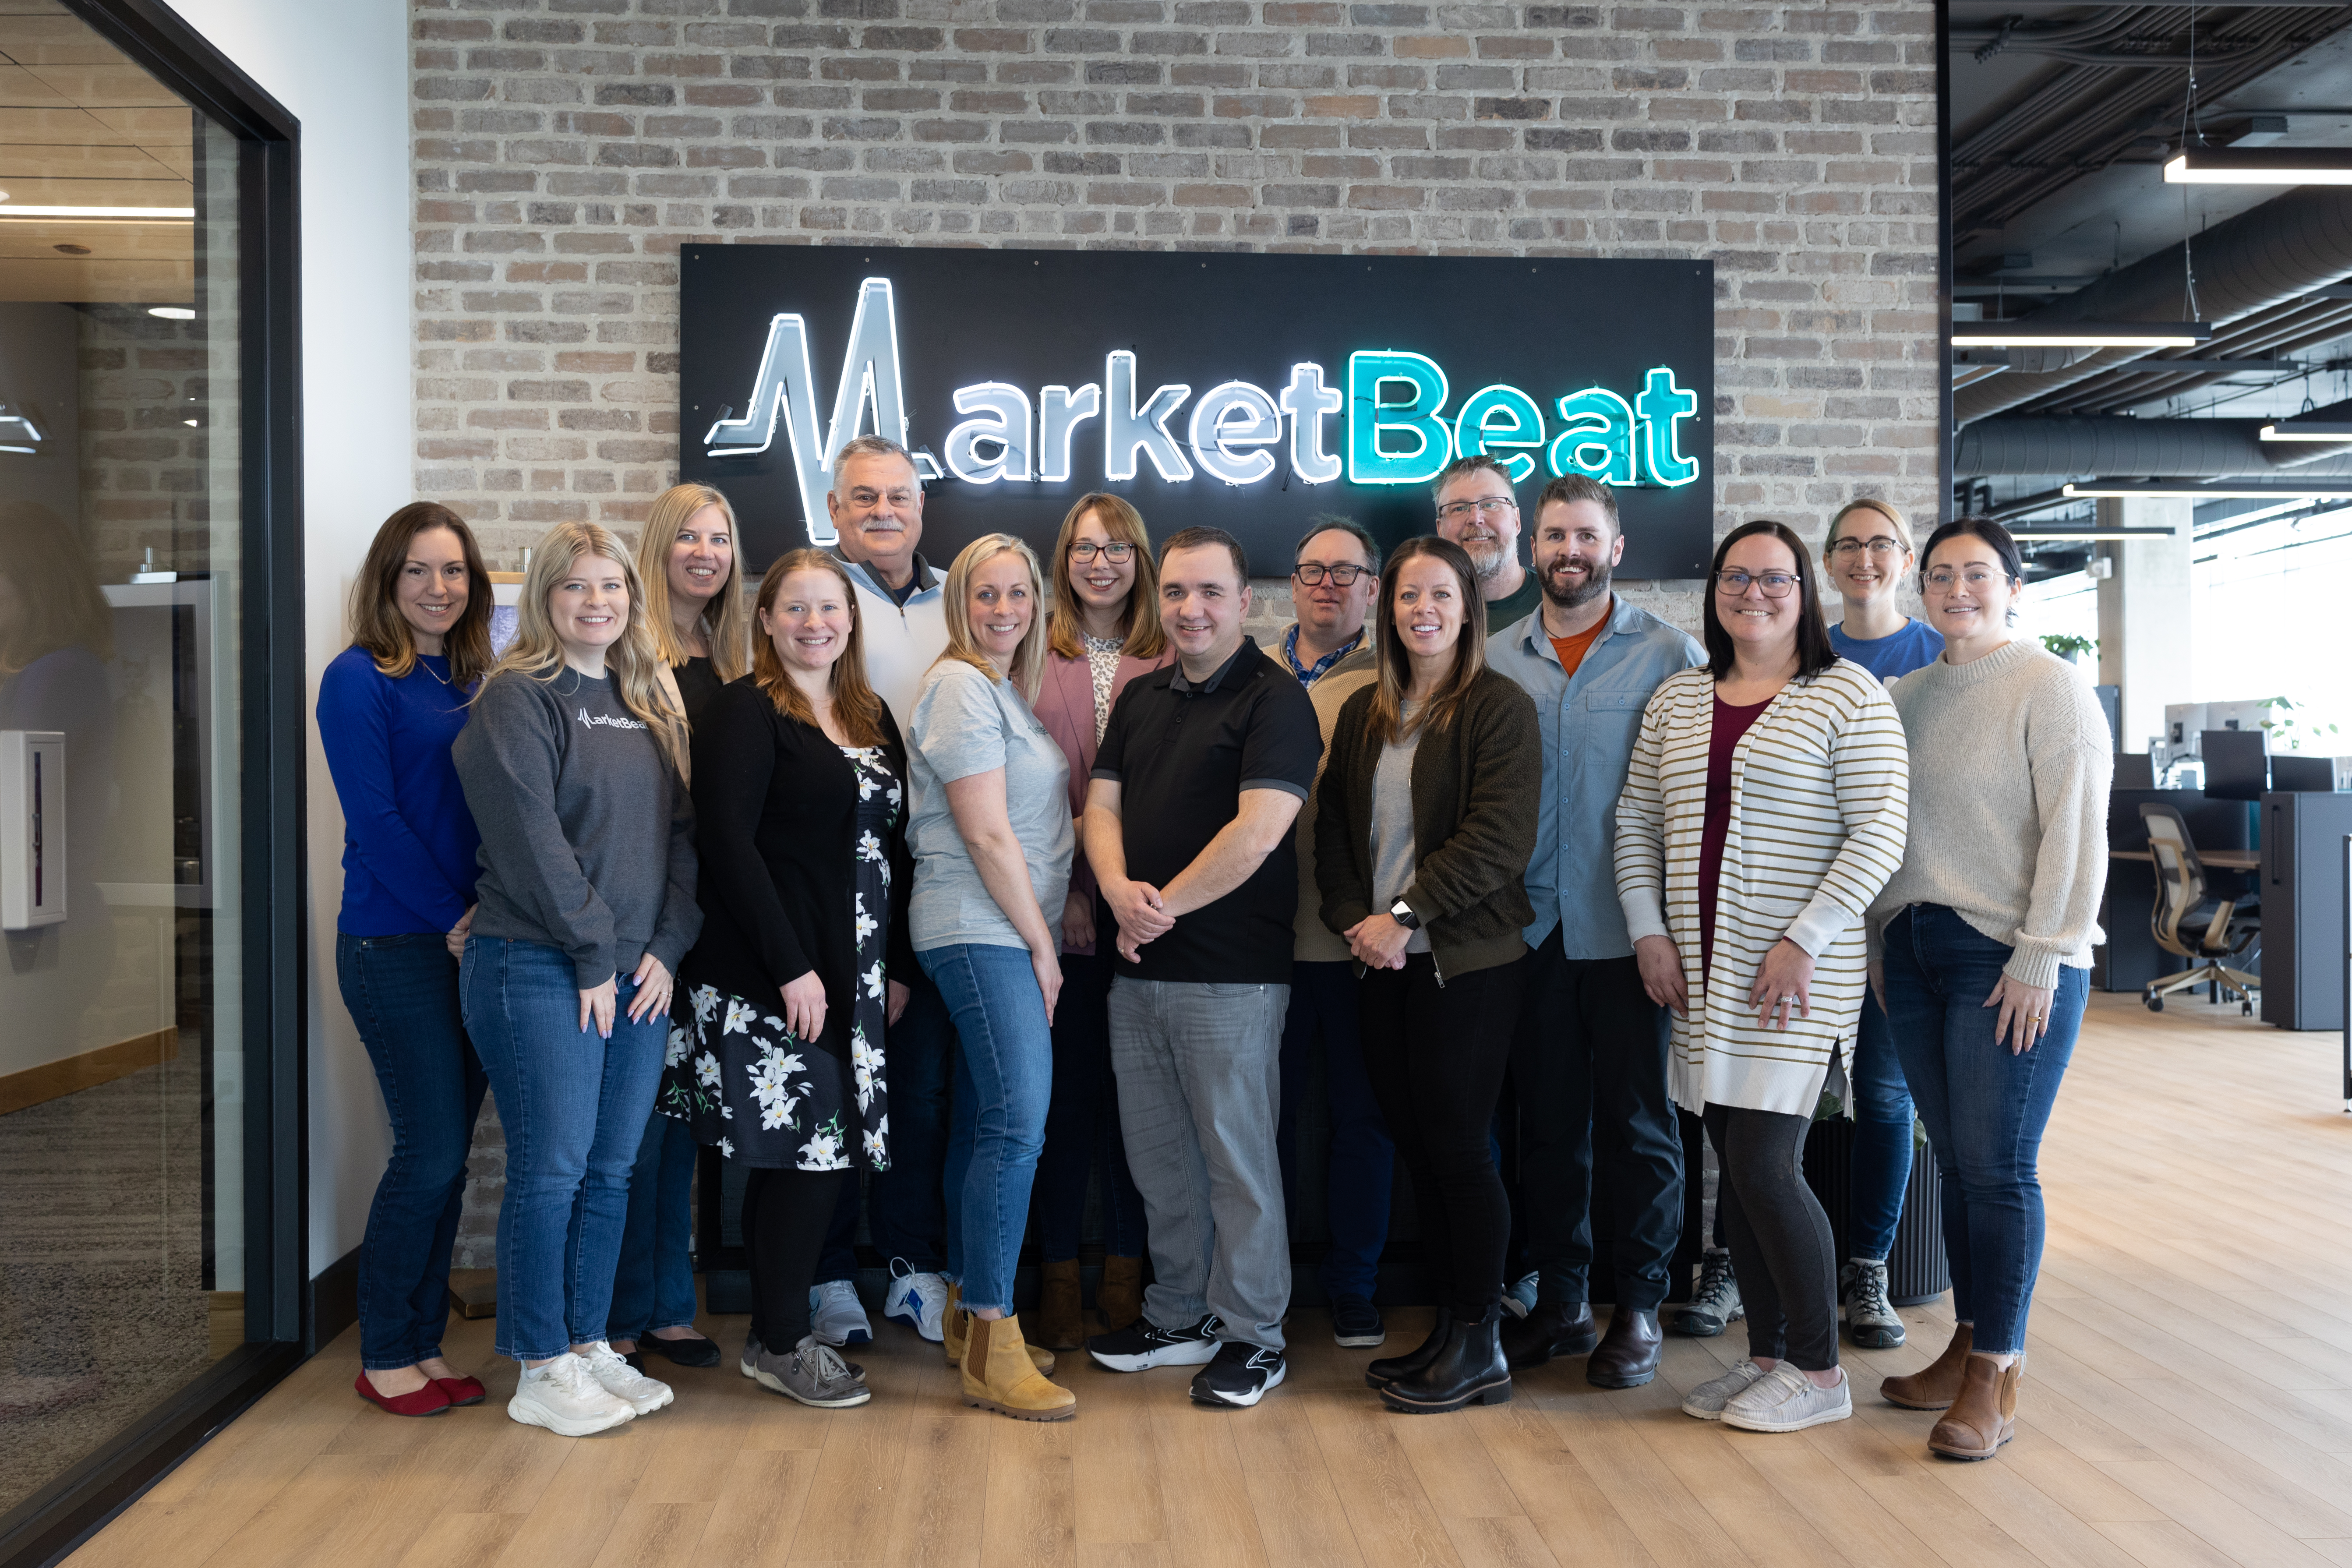 Picture of the MarketBeat team in front of MarketBeat sign.